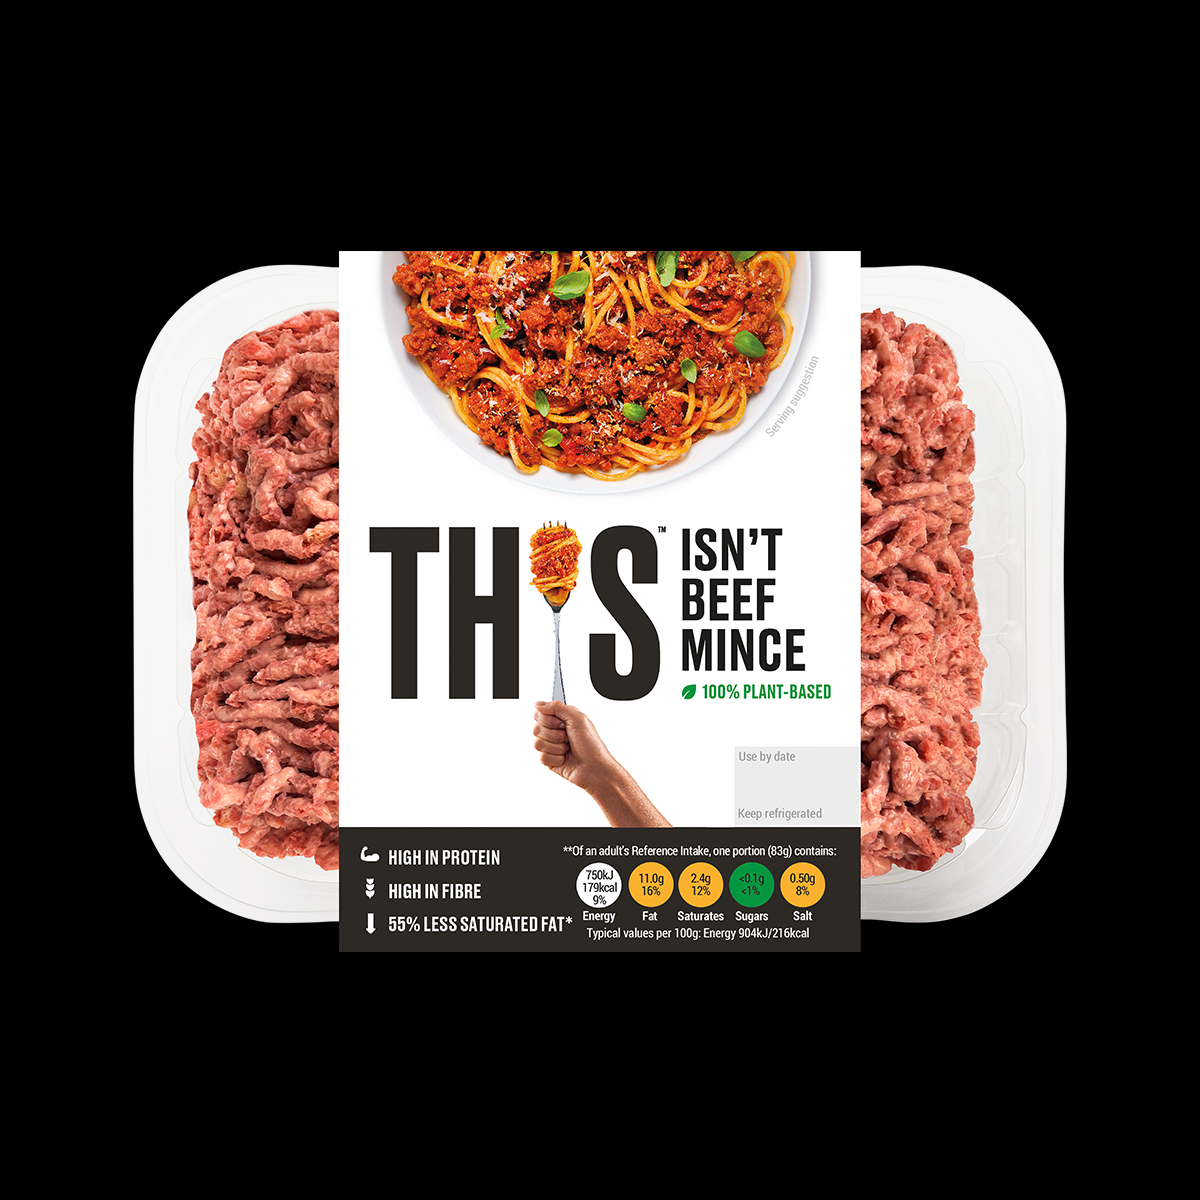 Plant-based & vegan alternative to beef mince from THIS with nutritional information.